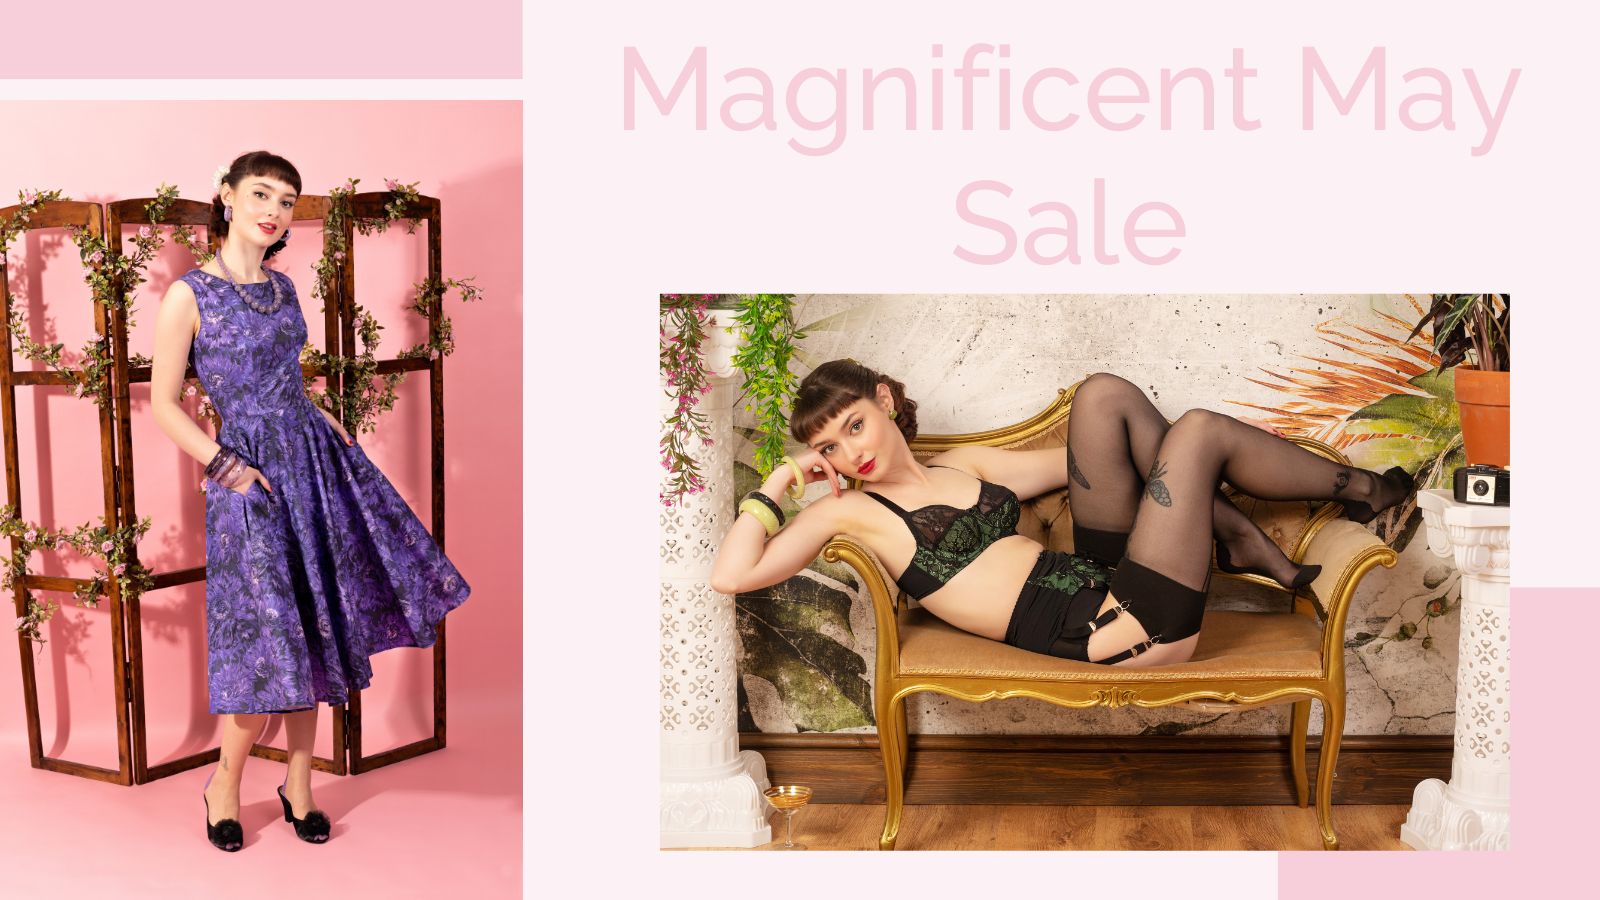 Magnificent May  Sale